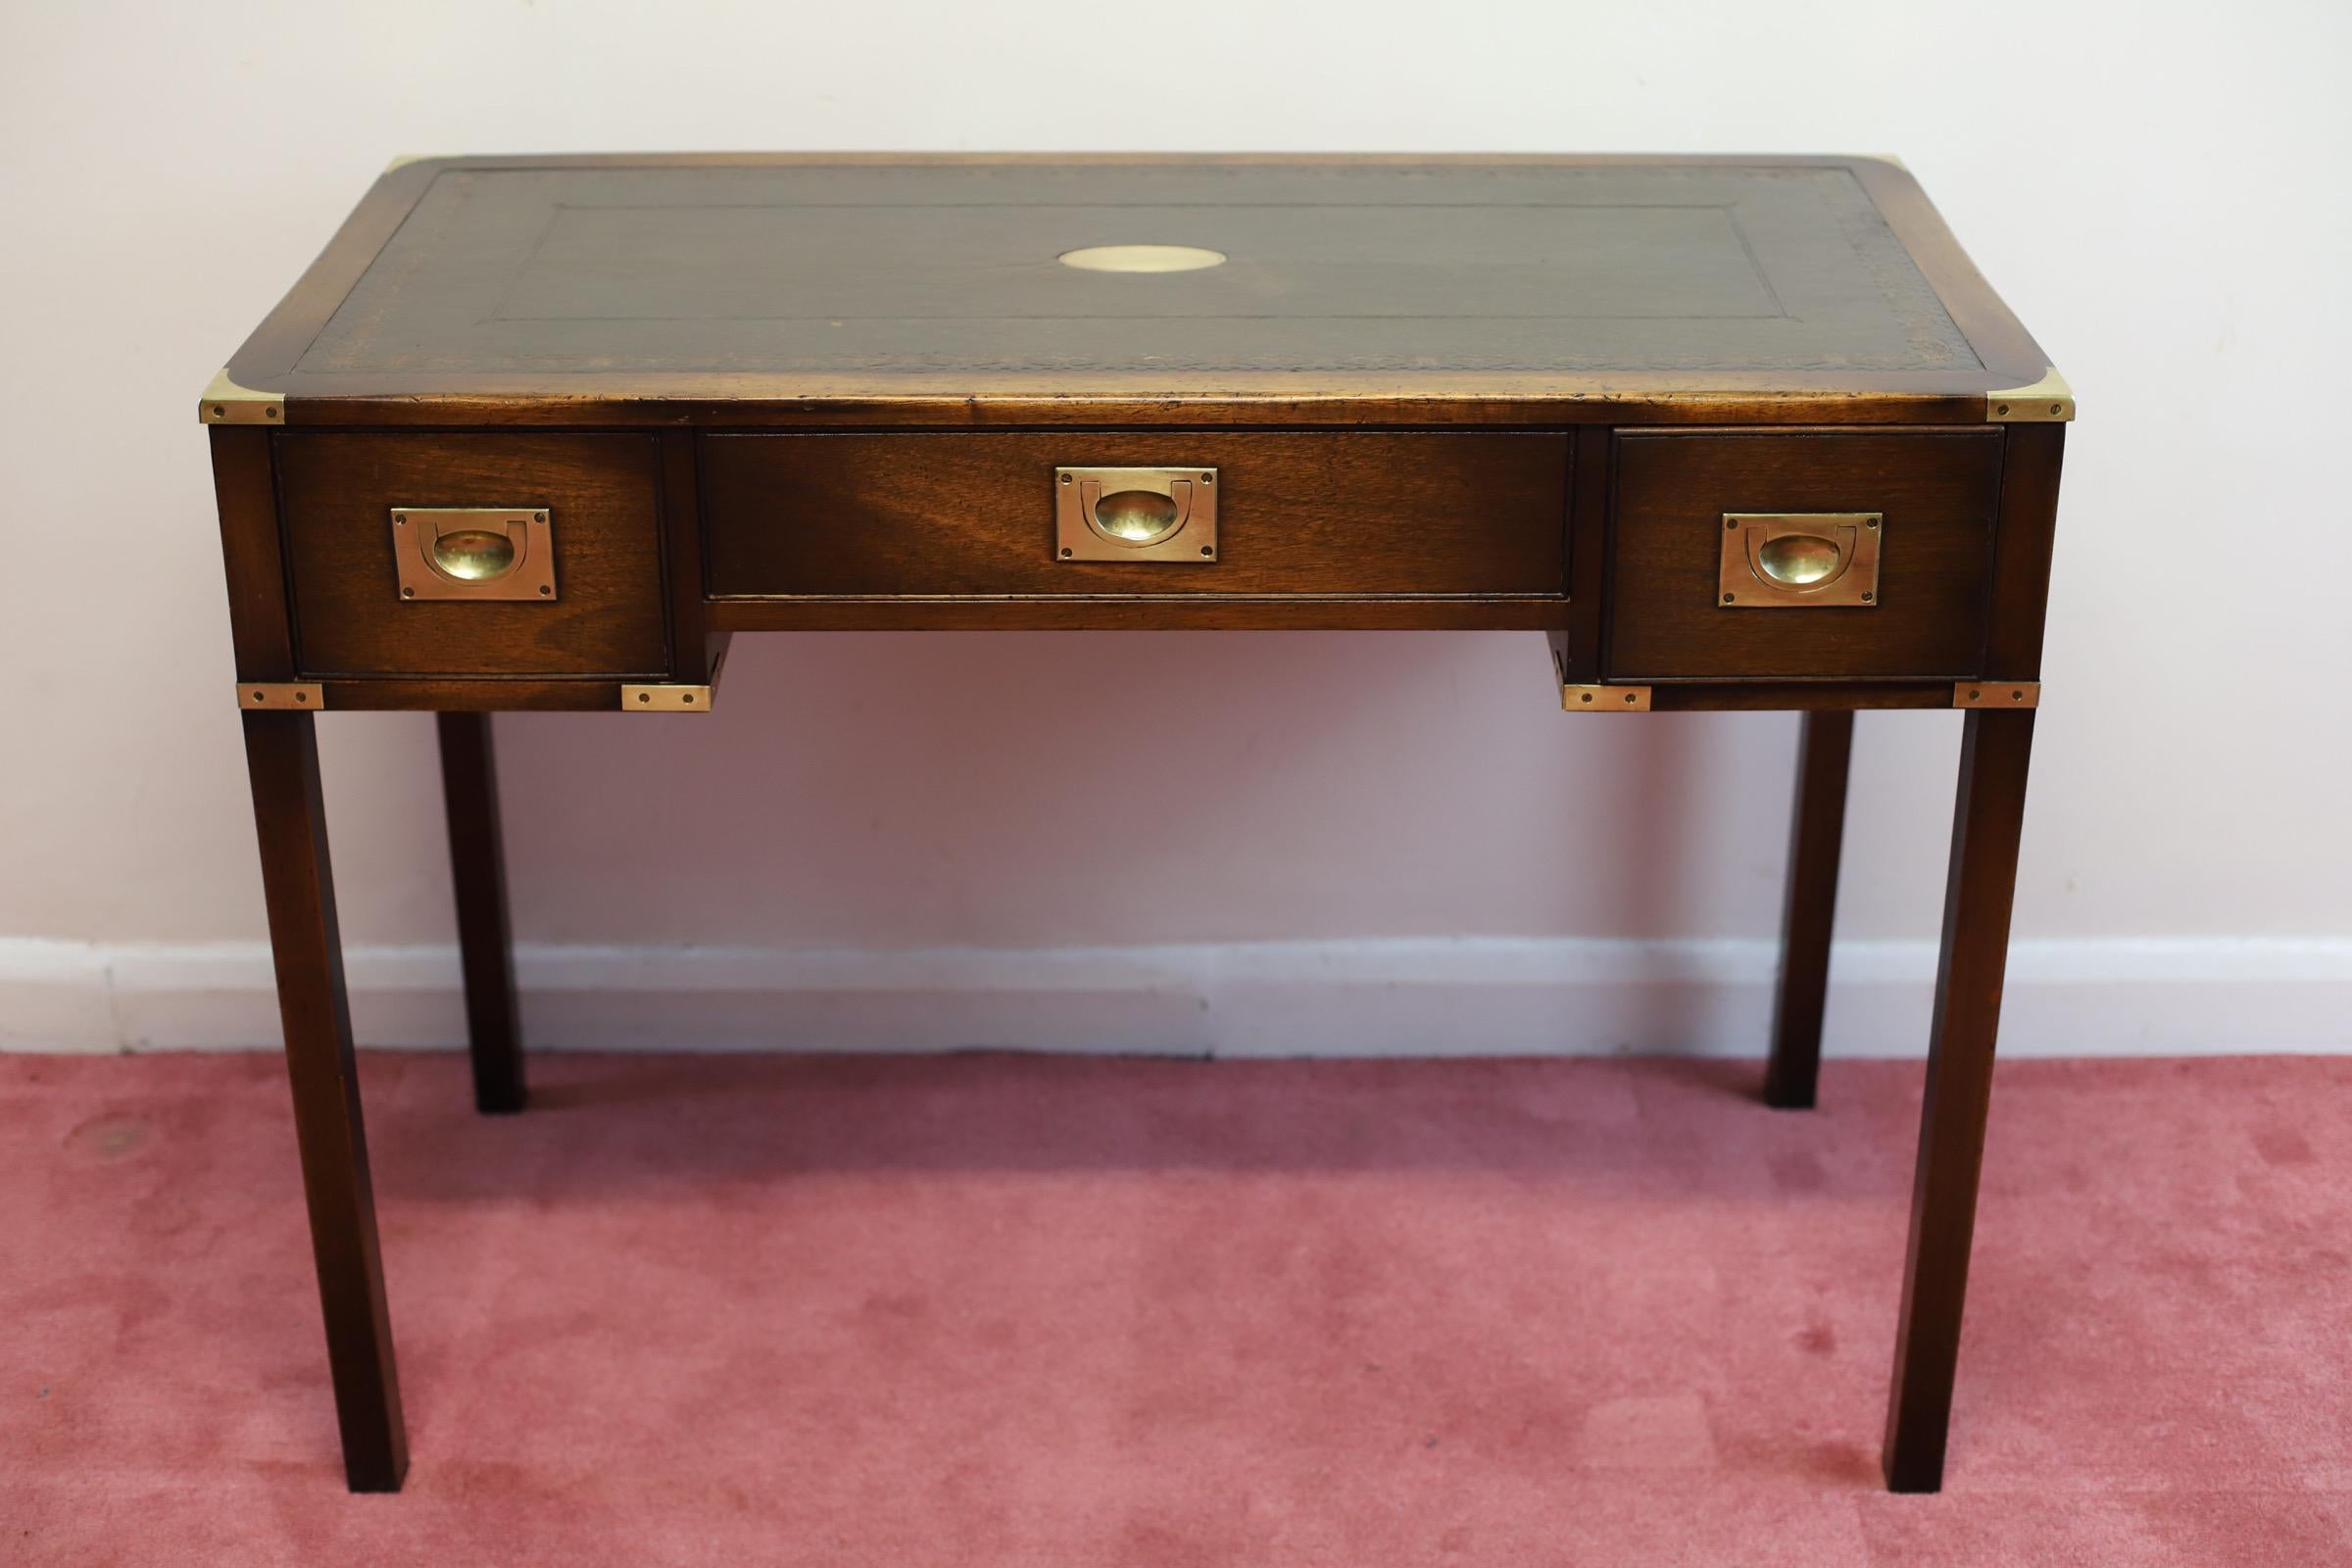 
We delight to ofer for sale this amazing military campaign writing table with brass corners and leather top retailed by Harrods London in amazing condition.
Don't hesitate to contact me if you have any questions.
Please have a closer look at the